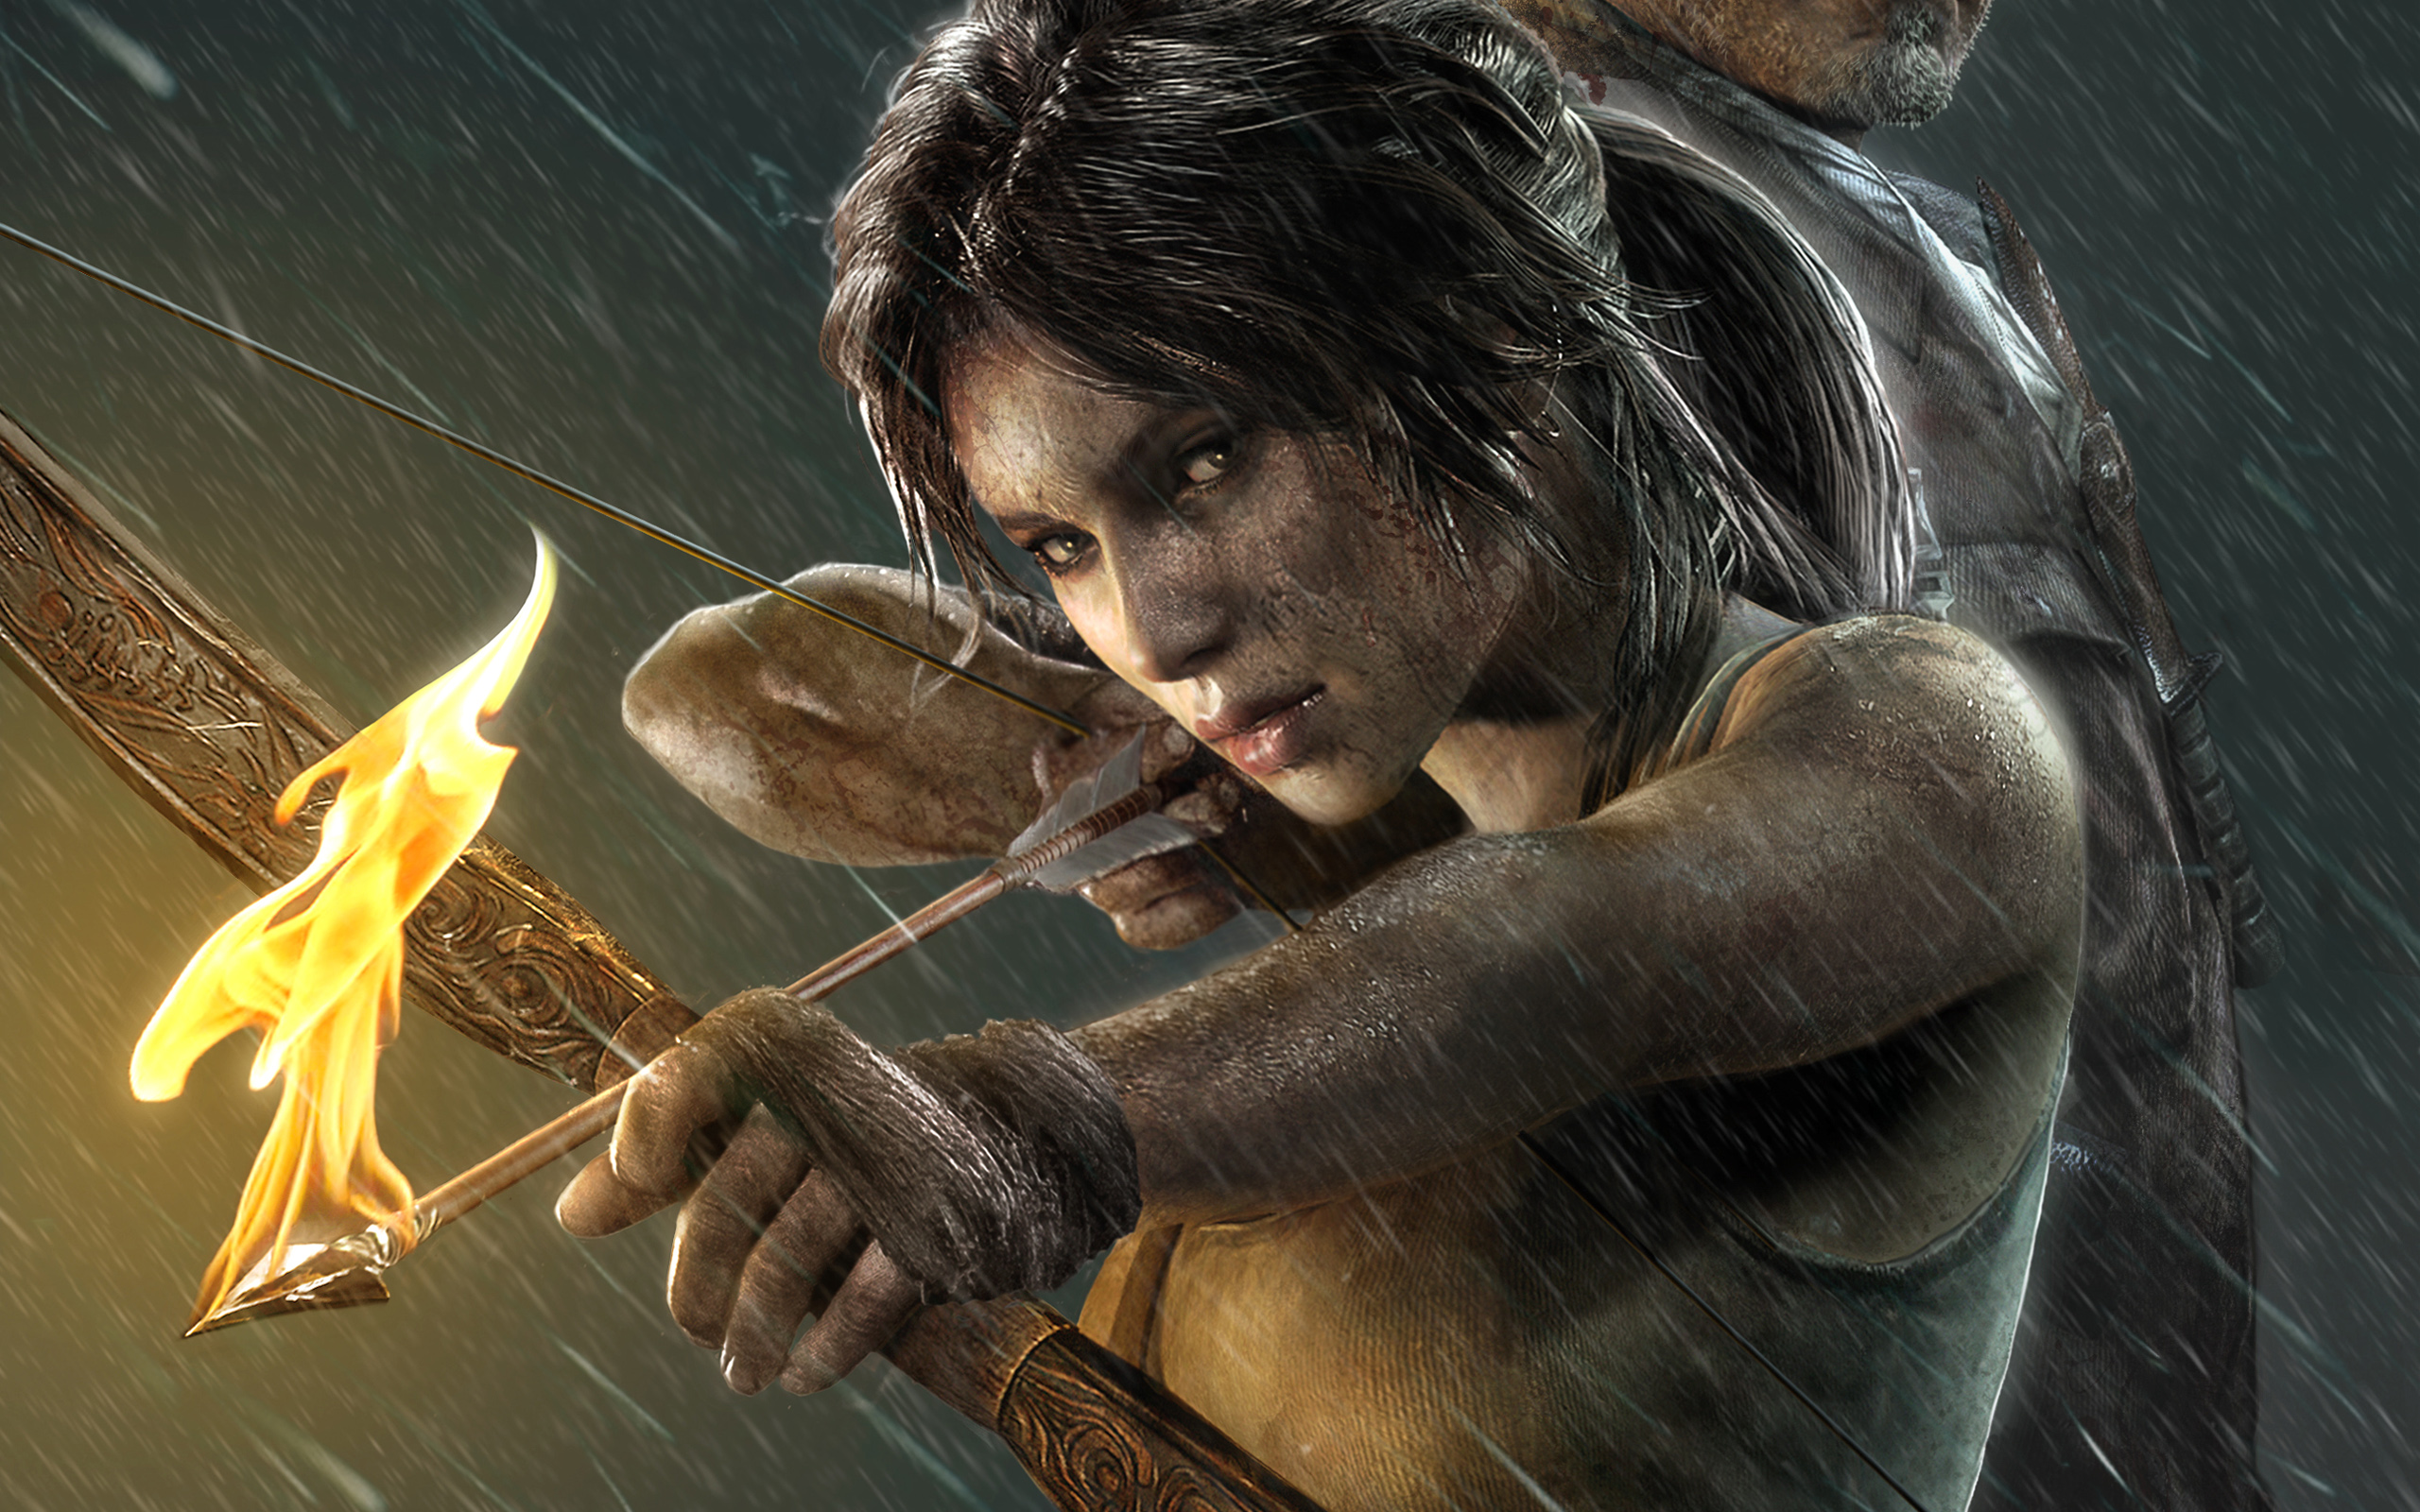 Tomb Raider reboot to be inspired by 2013 video game